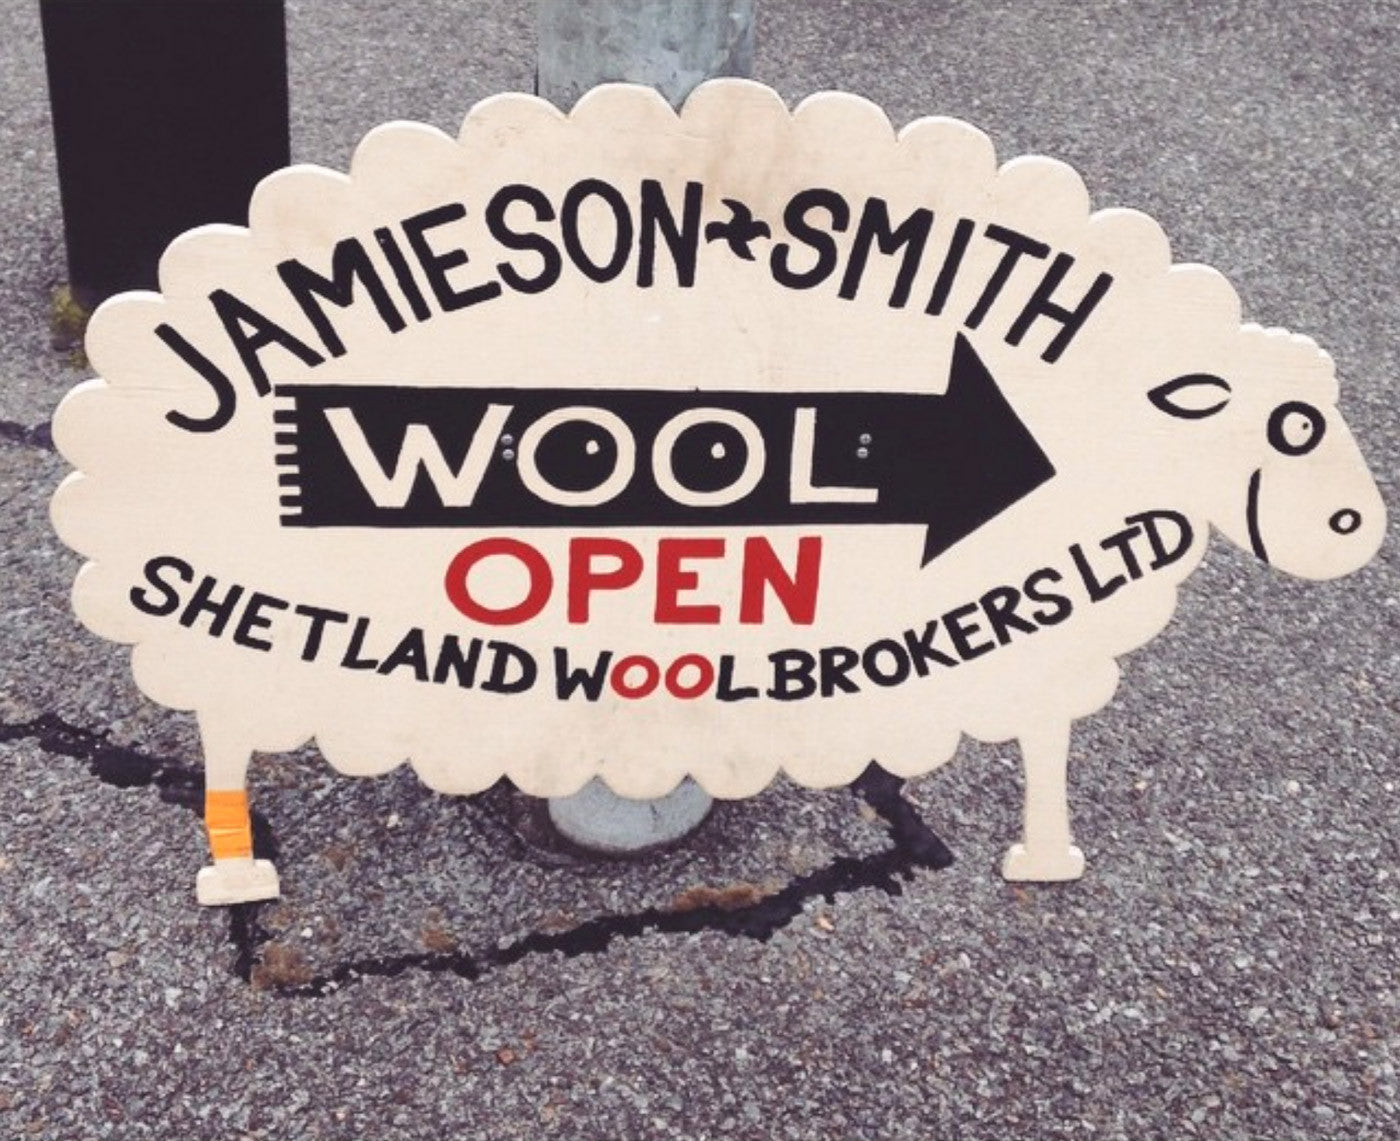 Jamieson and Smith store sign